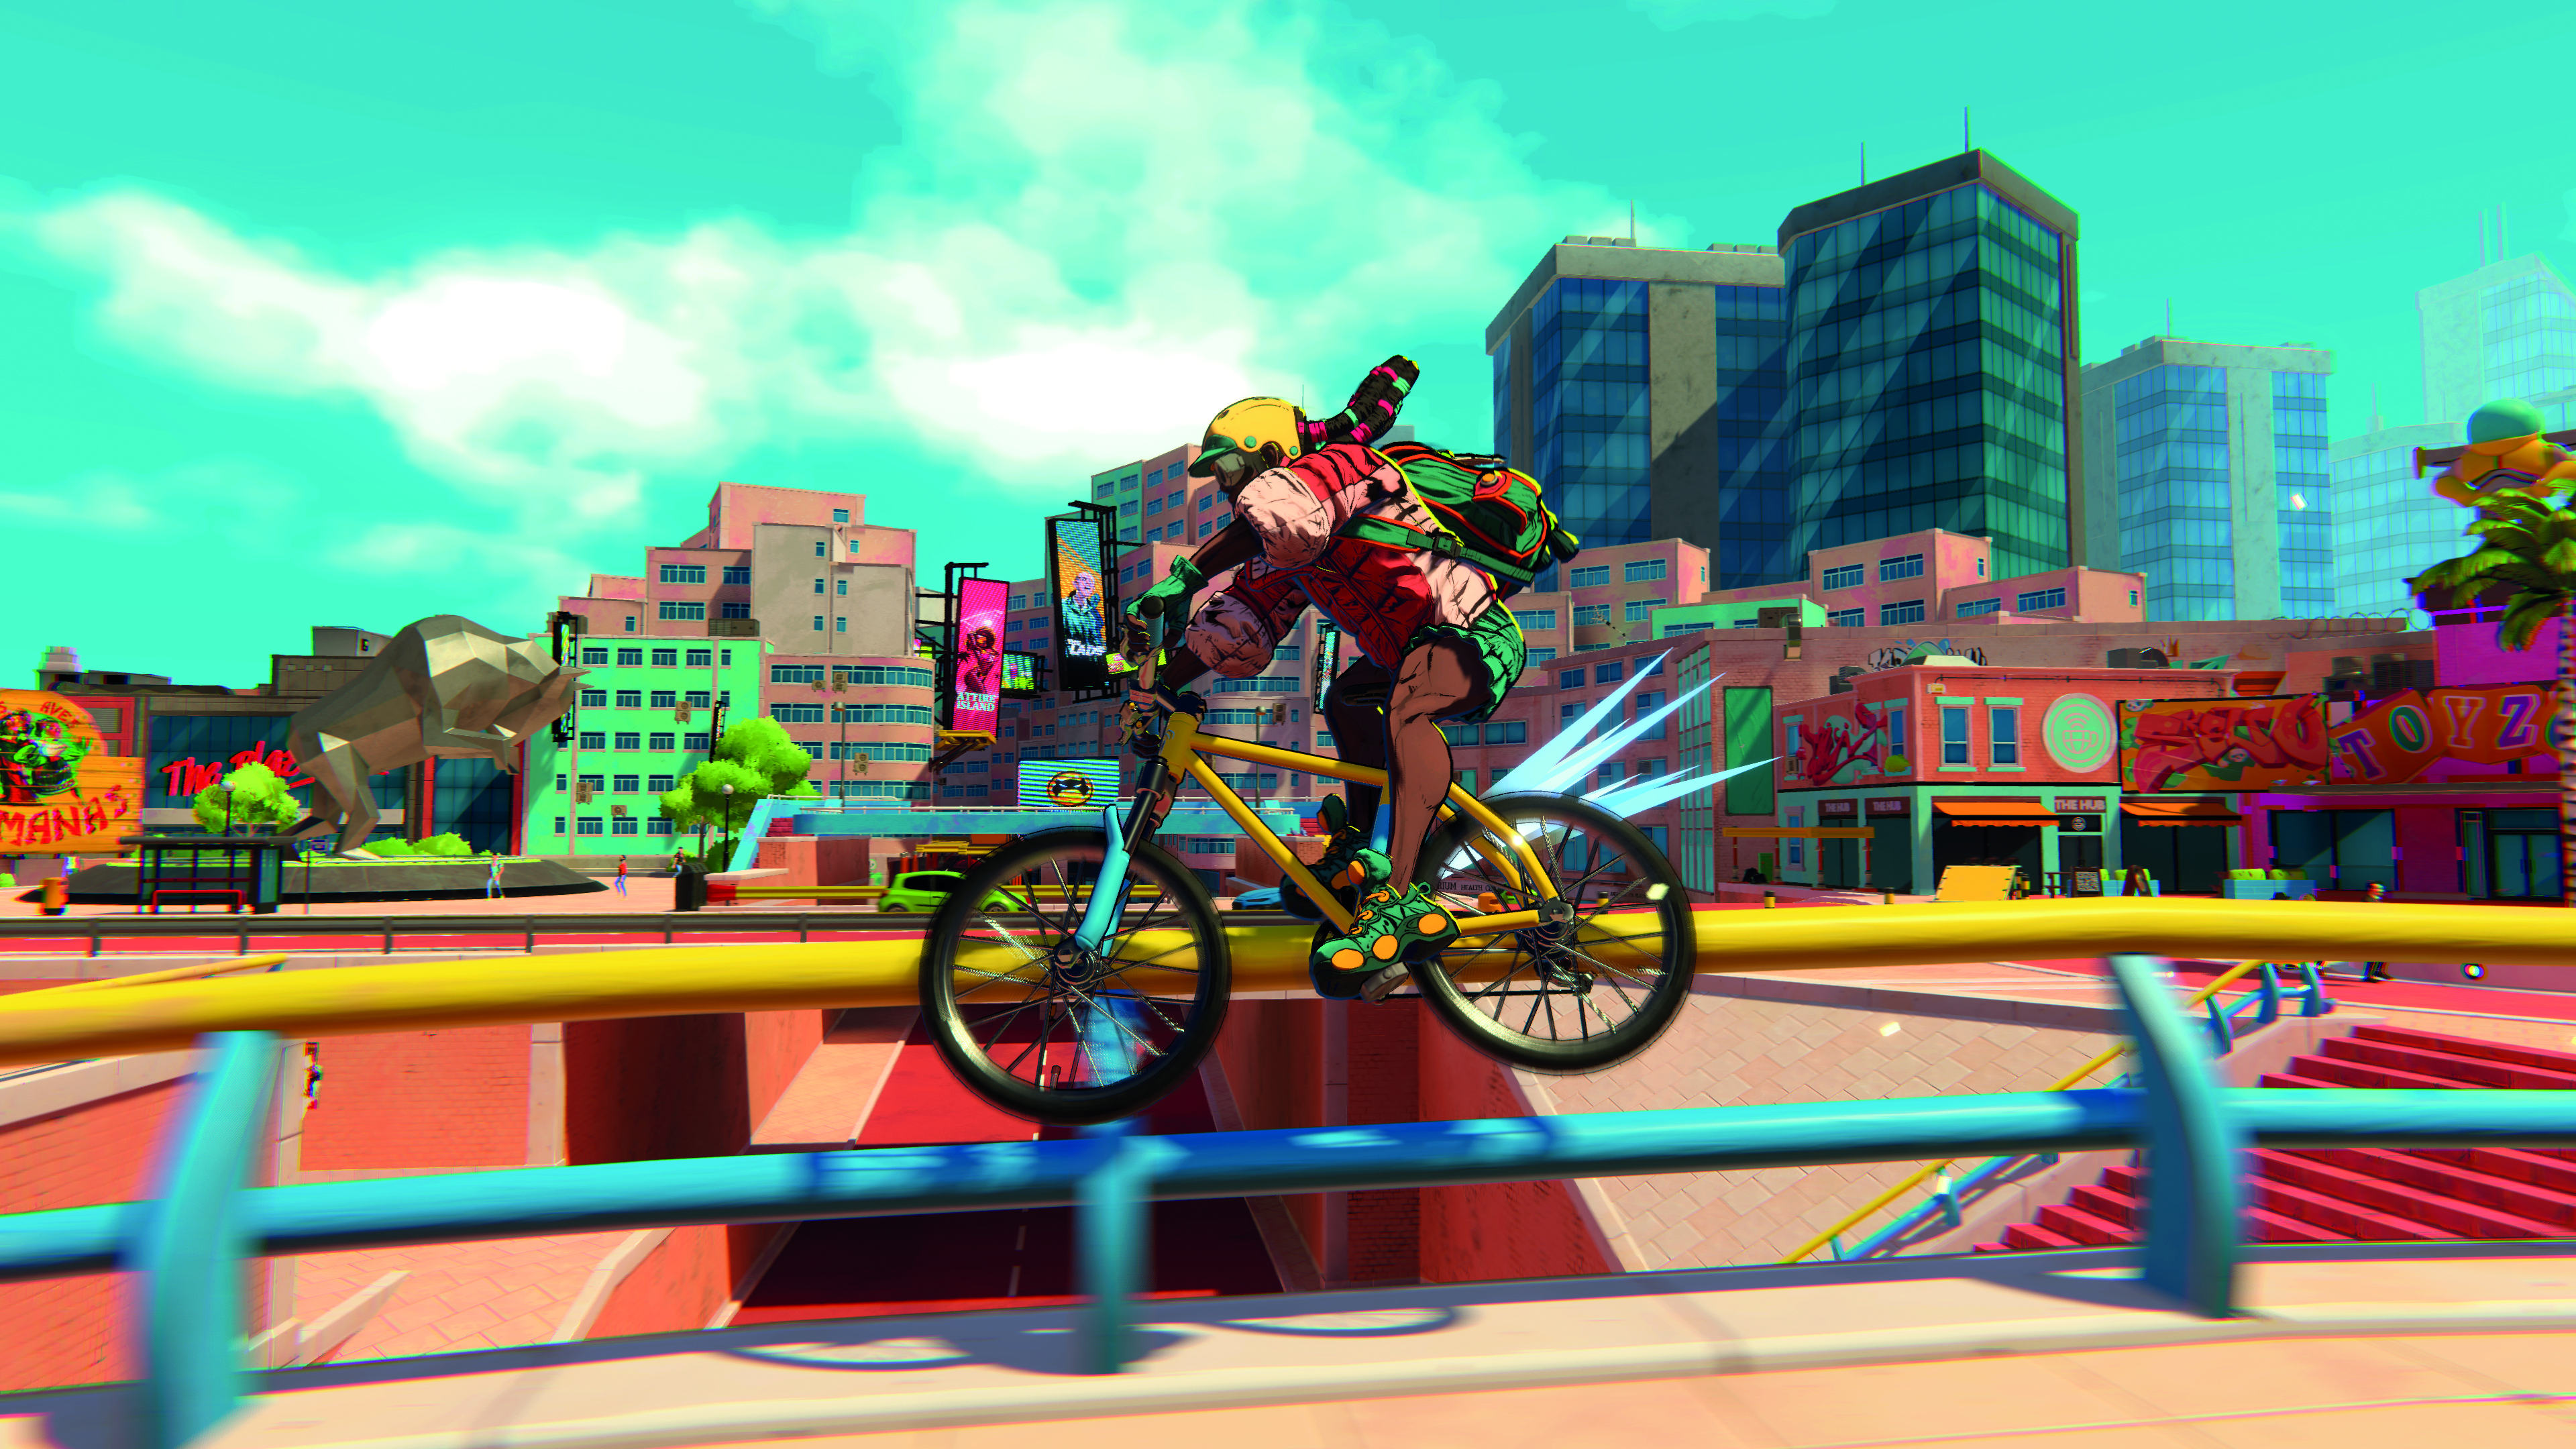 The art of making open world video games; a bike rider grinds on a rail